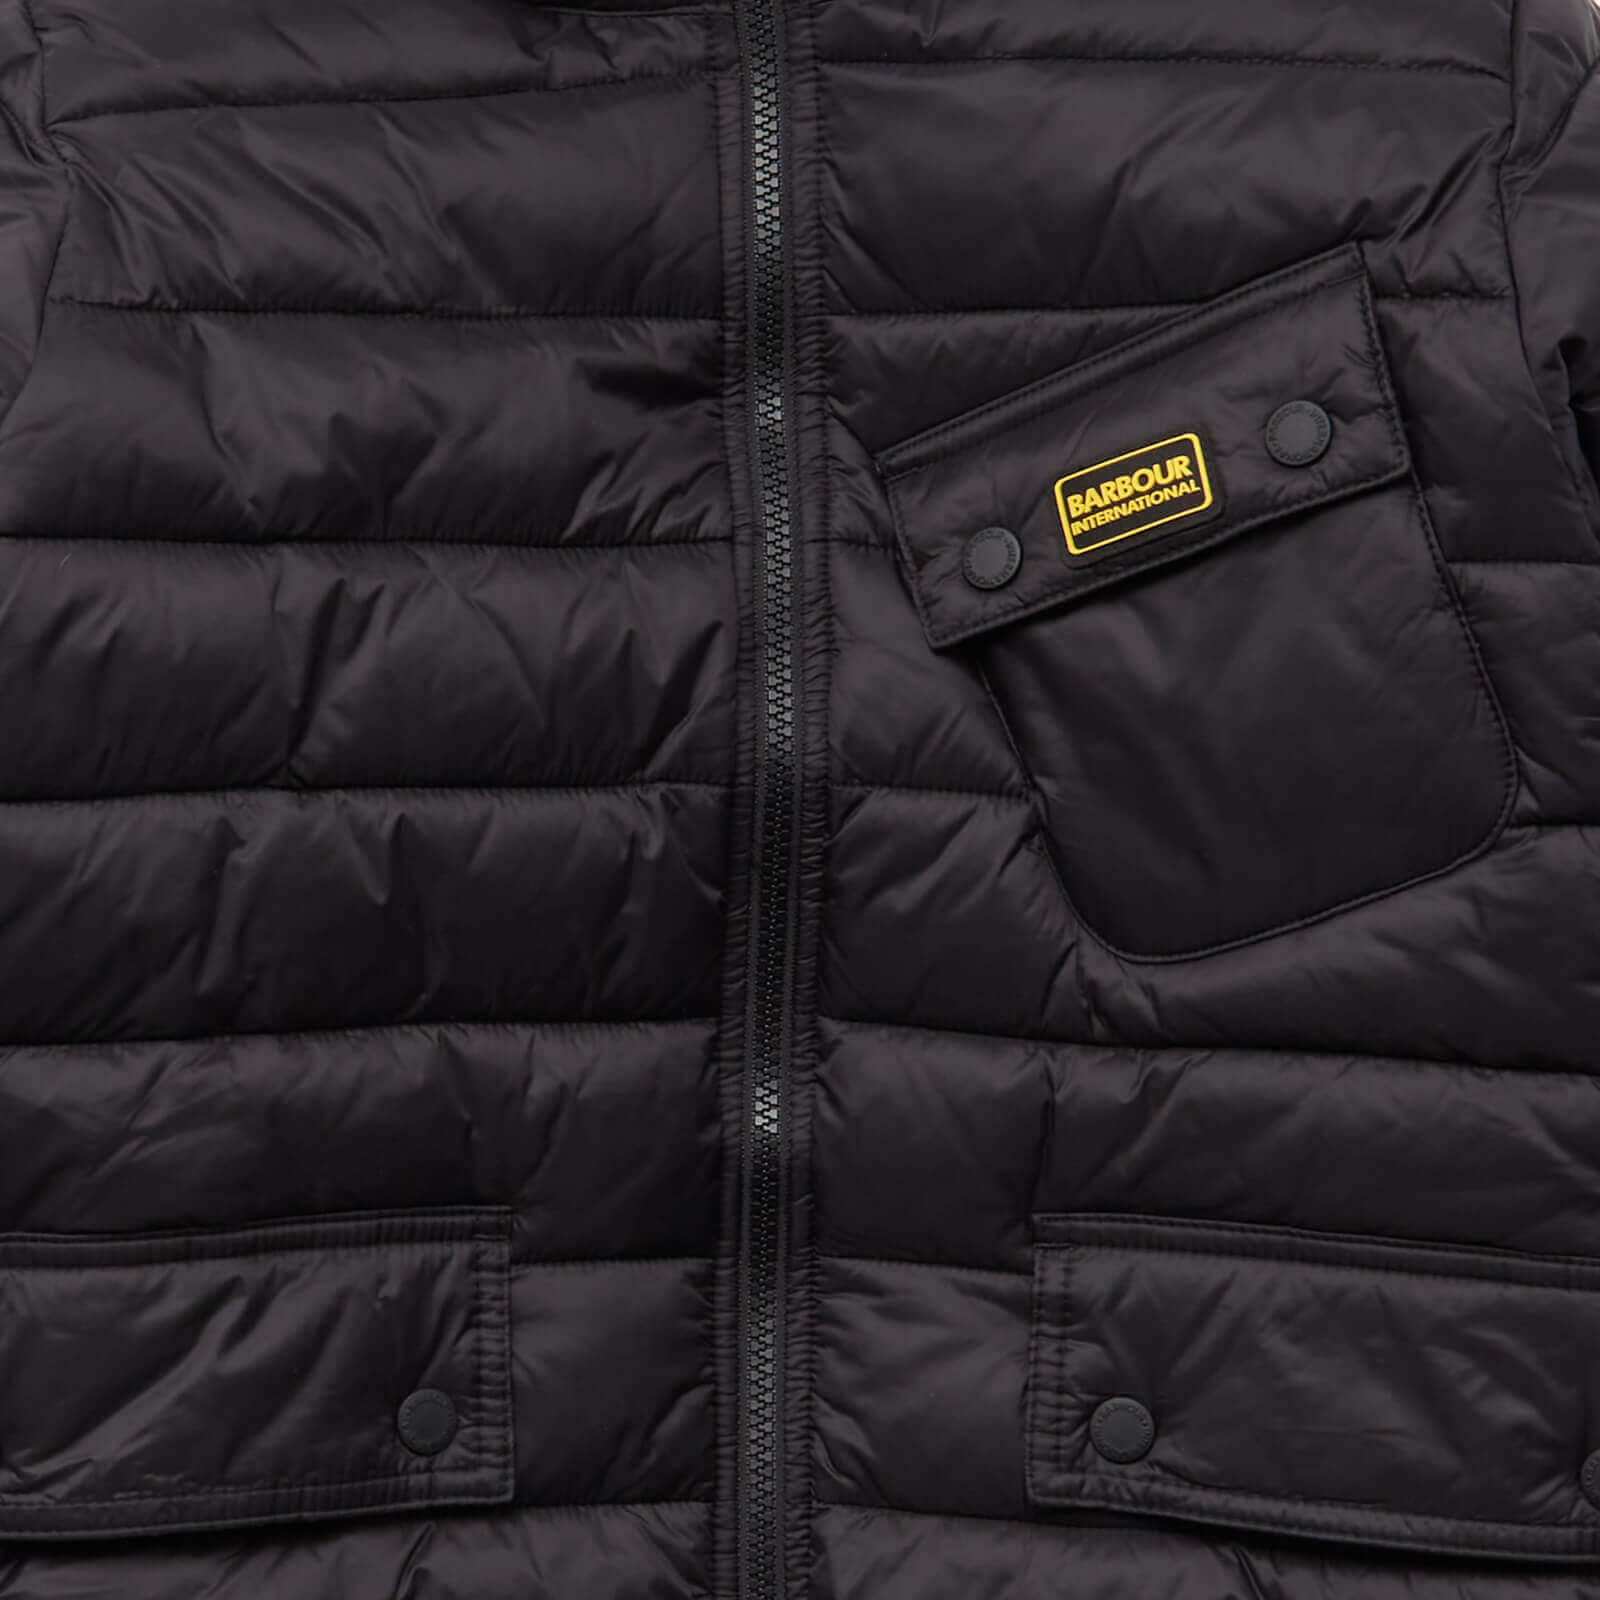 Barbour International Boys' Ouston Hooded Quilt - Black/Yellow - L (10-11 Years)